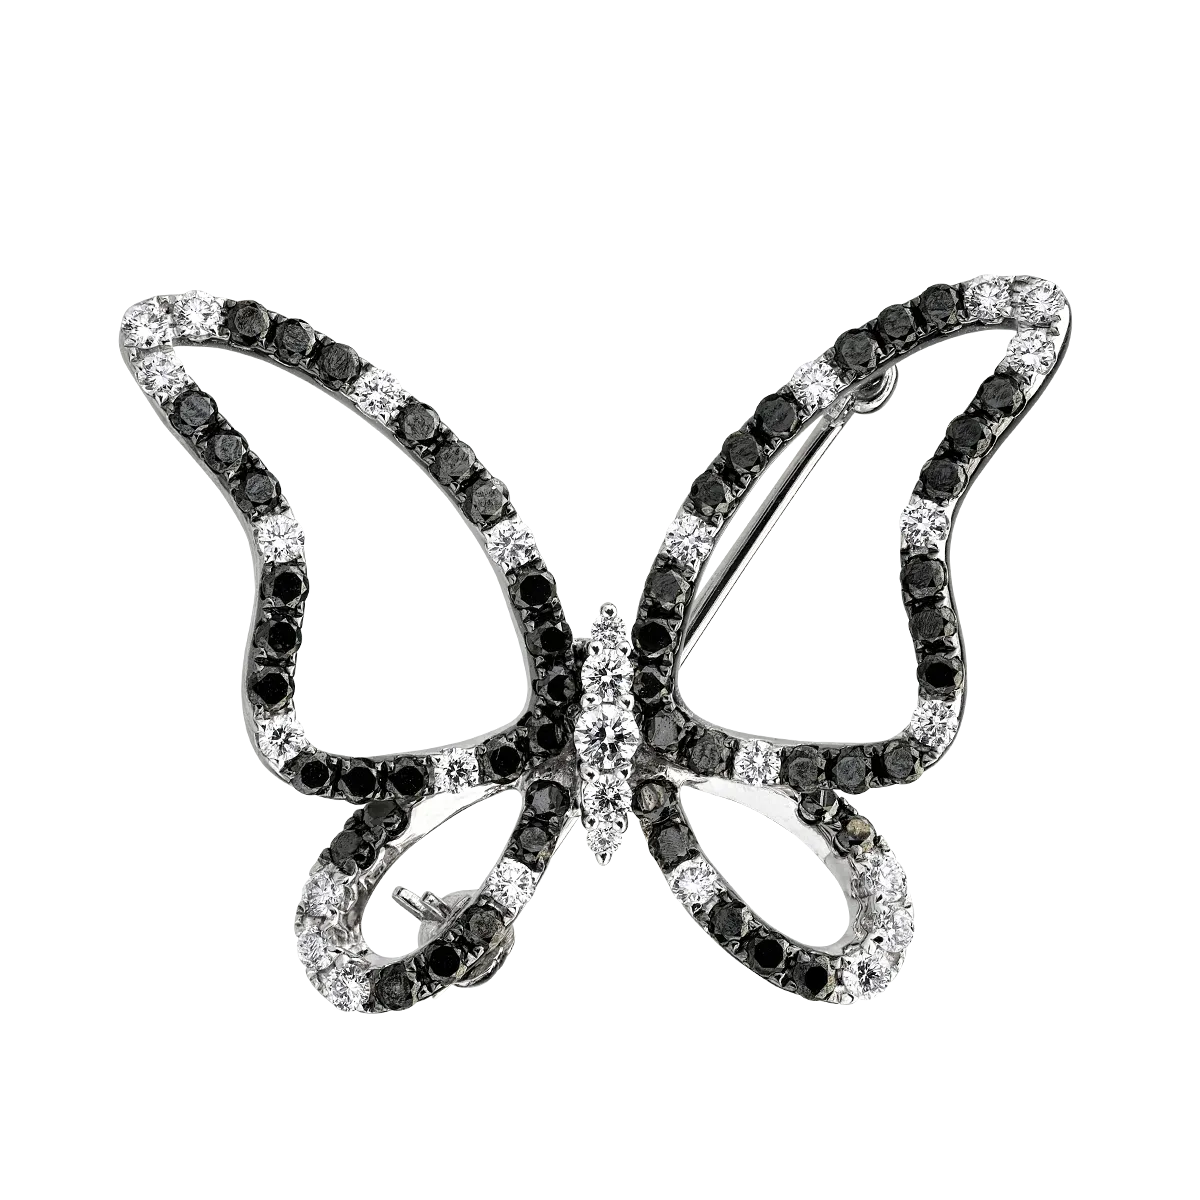 18K white gold brooch with 1.18ct black diamonds and 0.58ct clear diamonds